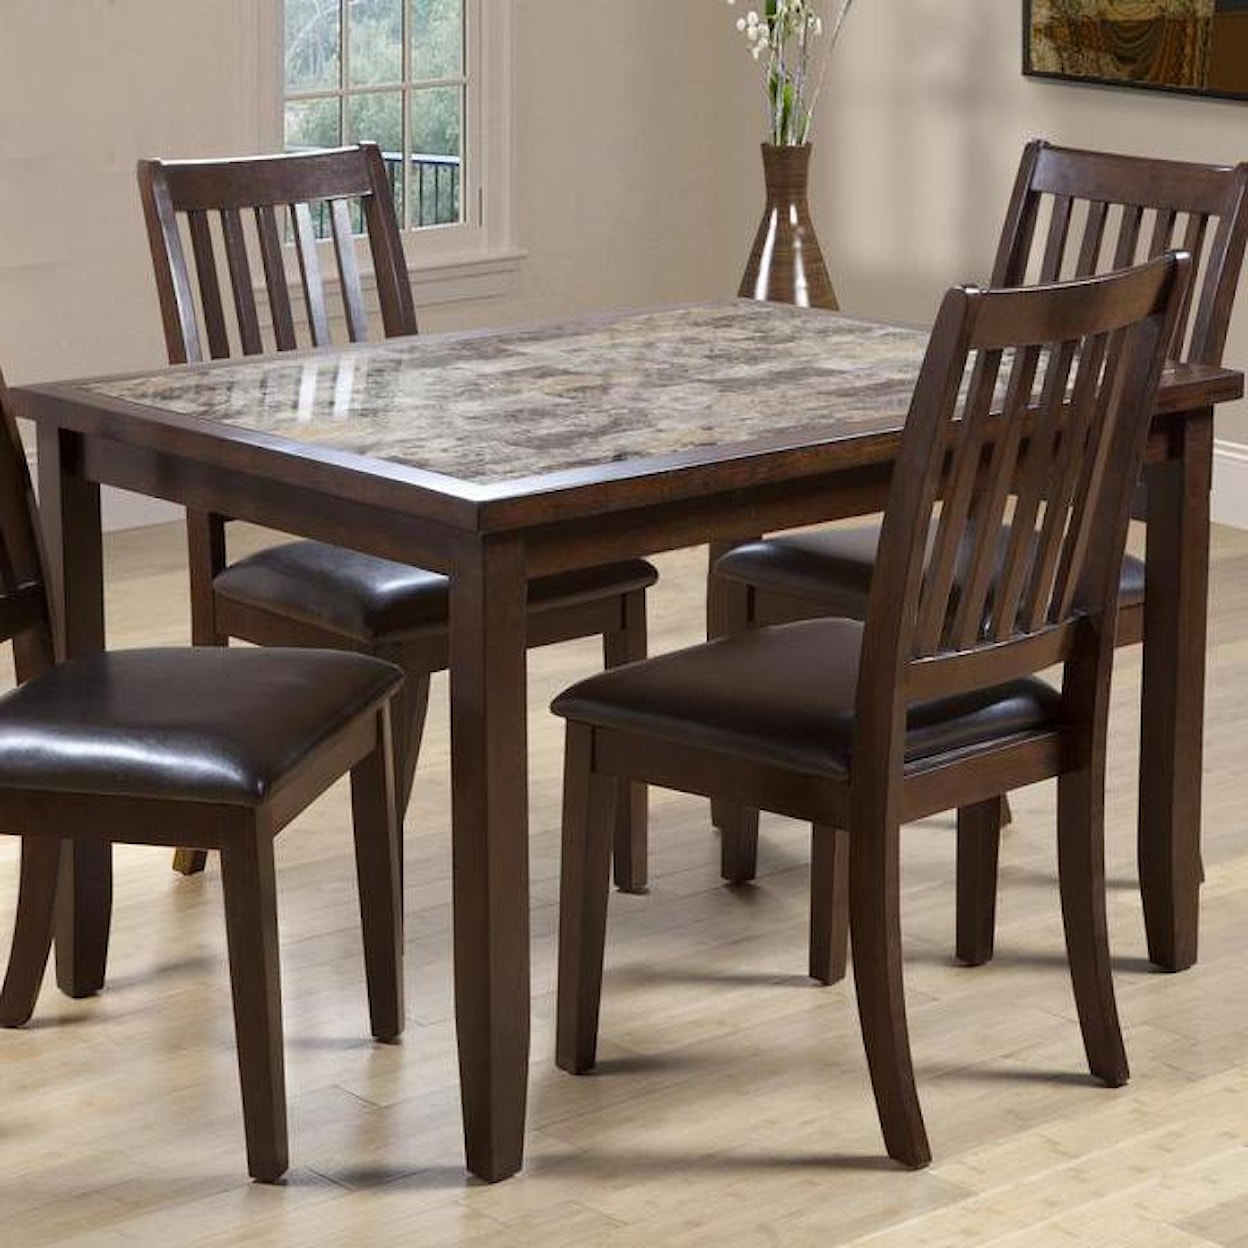 Primo International 2096 Dining Table with Faux Marble Top